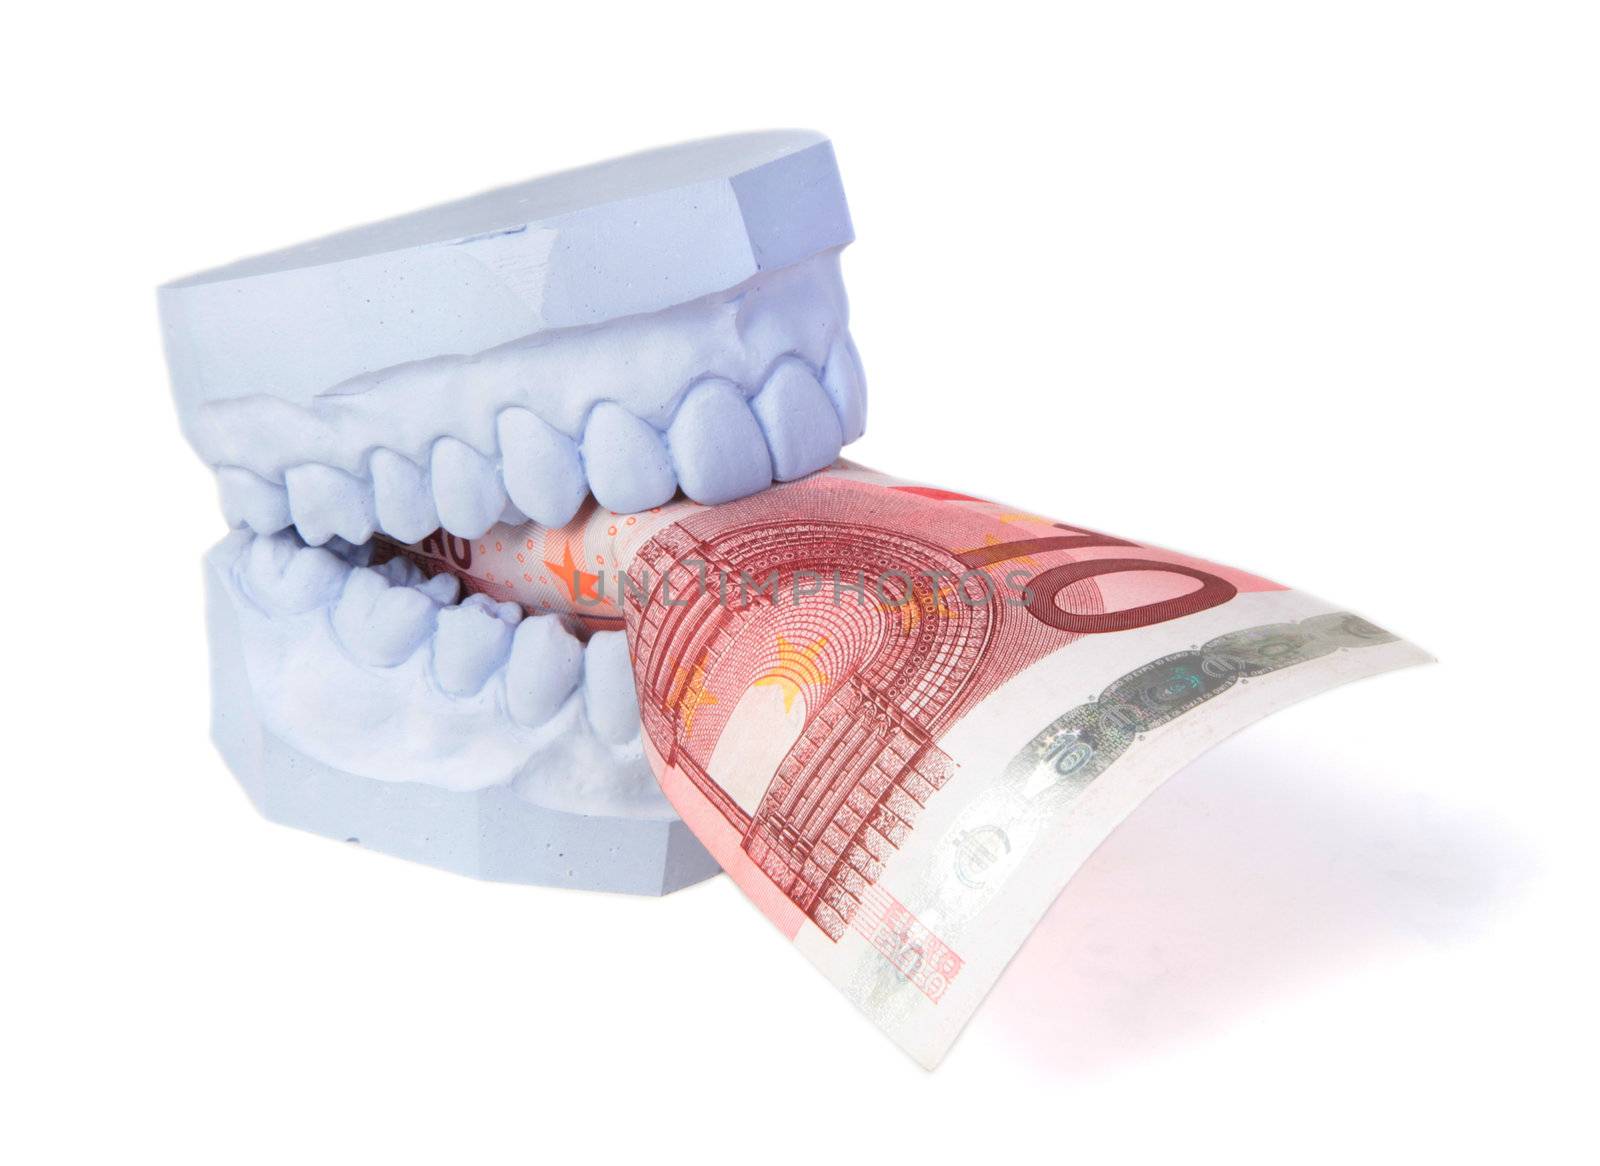 A set of teeth with some money. All isolated on white background.